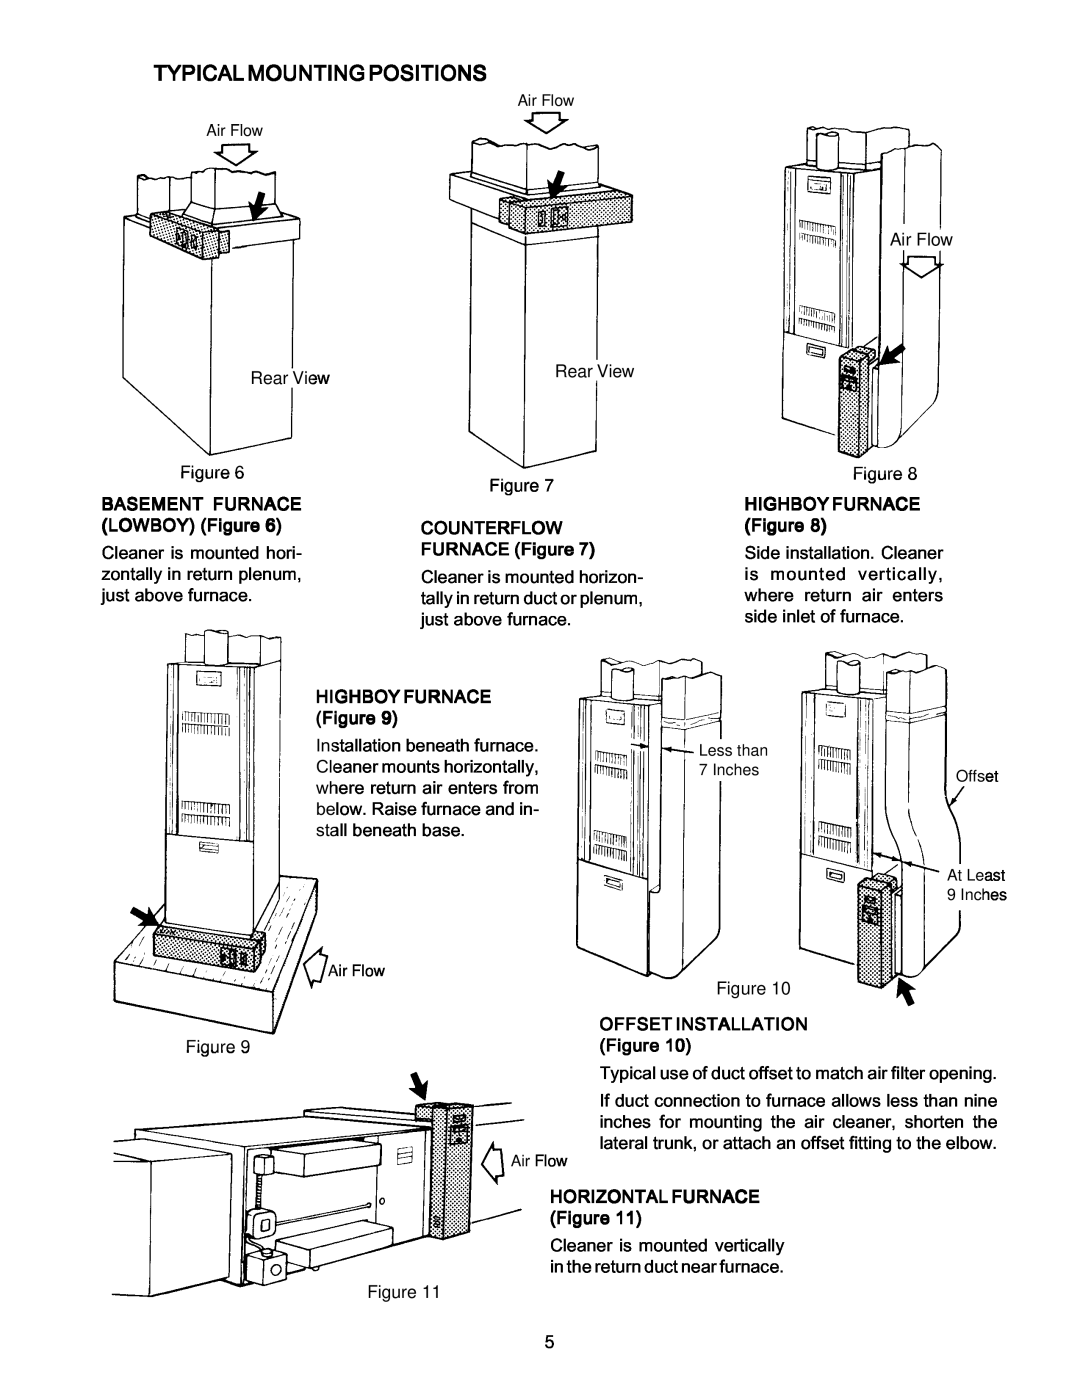 White Rodgers SST1600, SST2000 Typical Mounting Positions, BASEMENT FURNACE LOWBOY Figure, COUNTERFLOW FURNACE Figure 